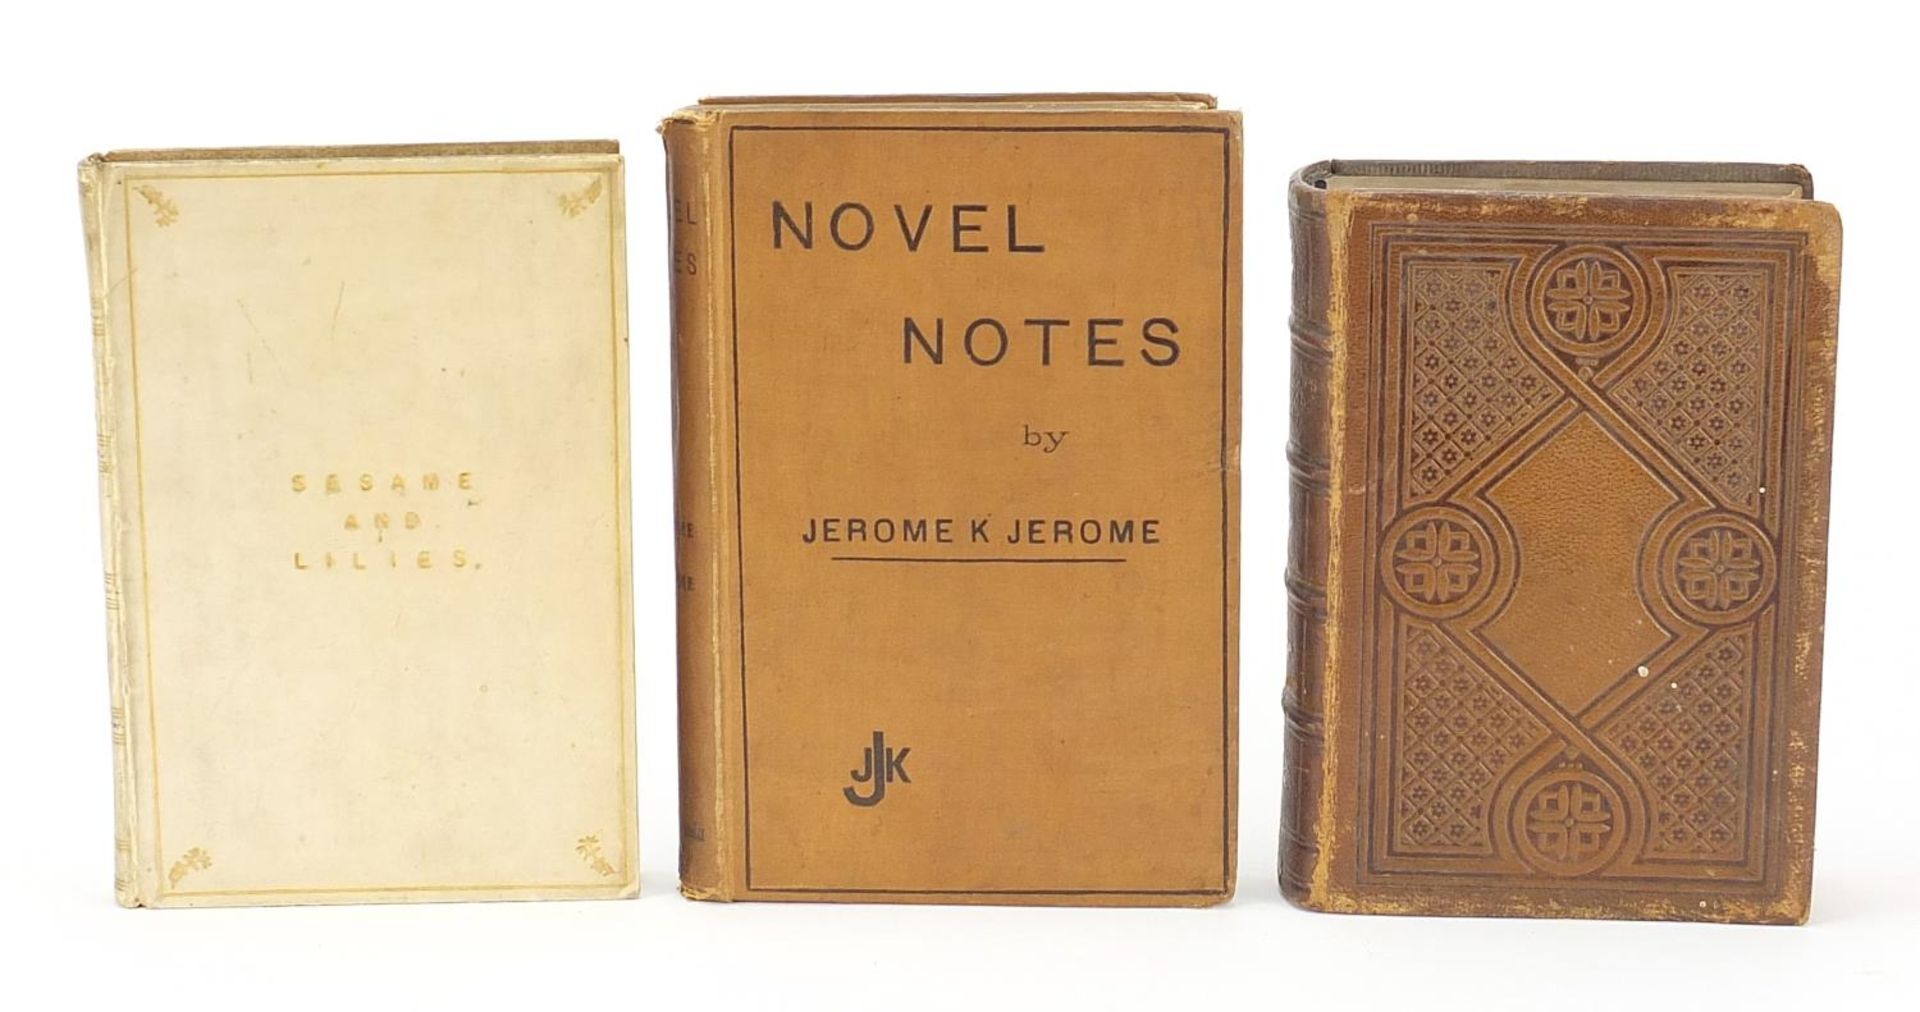 Three hardback books comprising Longfellow's Poetical Works, Novel Notes by Jerome K Jerome and